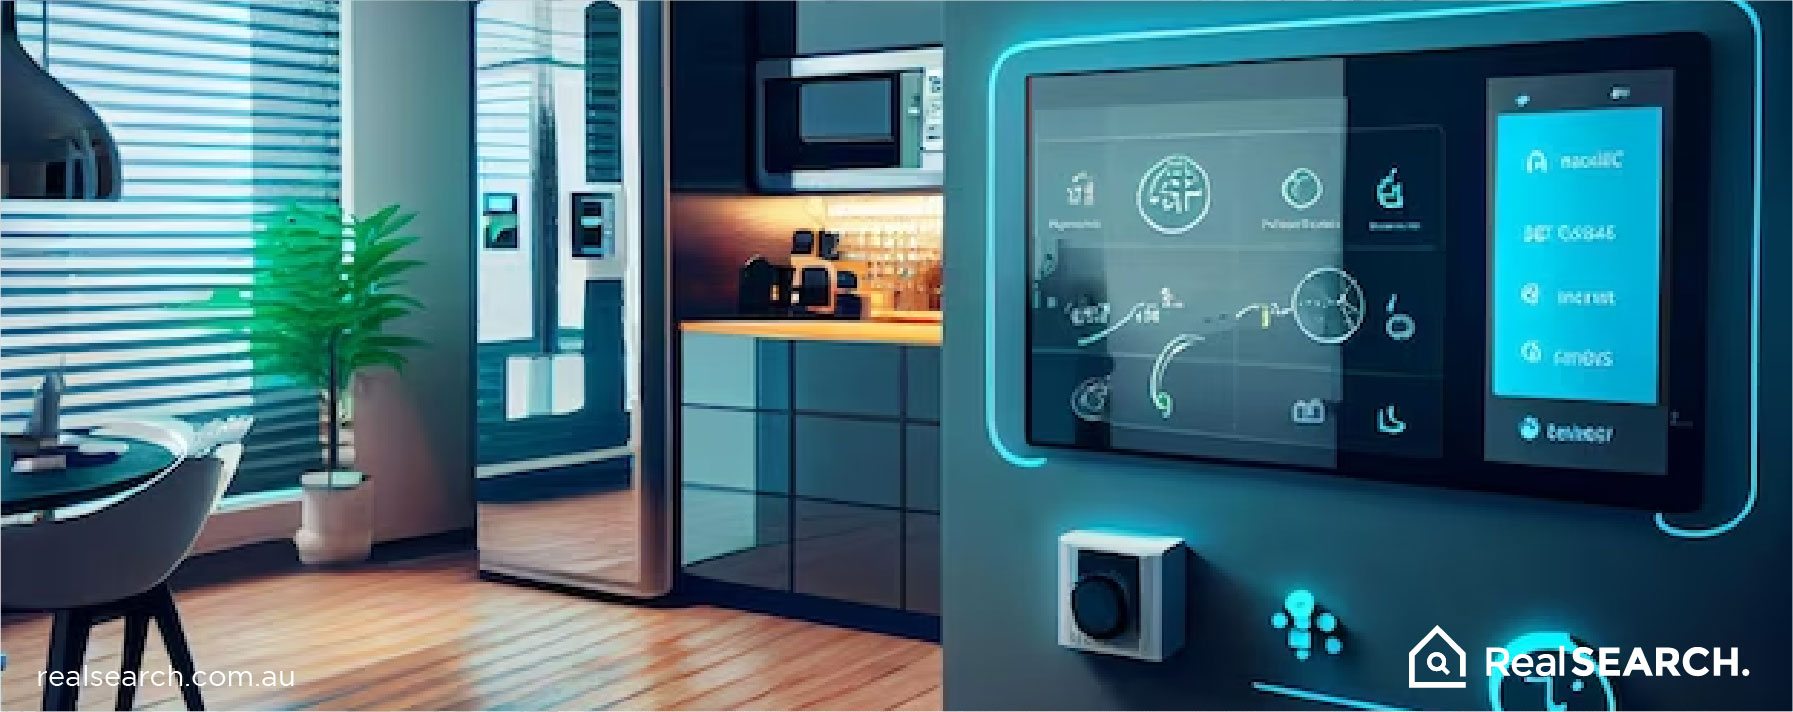 Revolutionize Your Home Living with These 5 Must-Have Tech Innovations